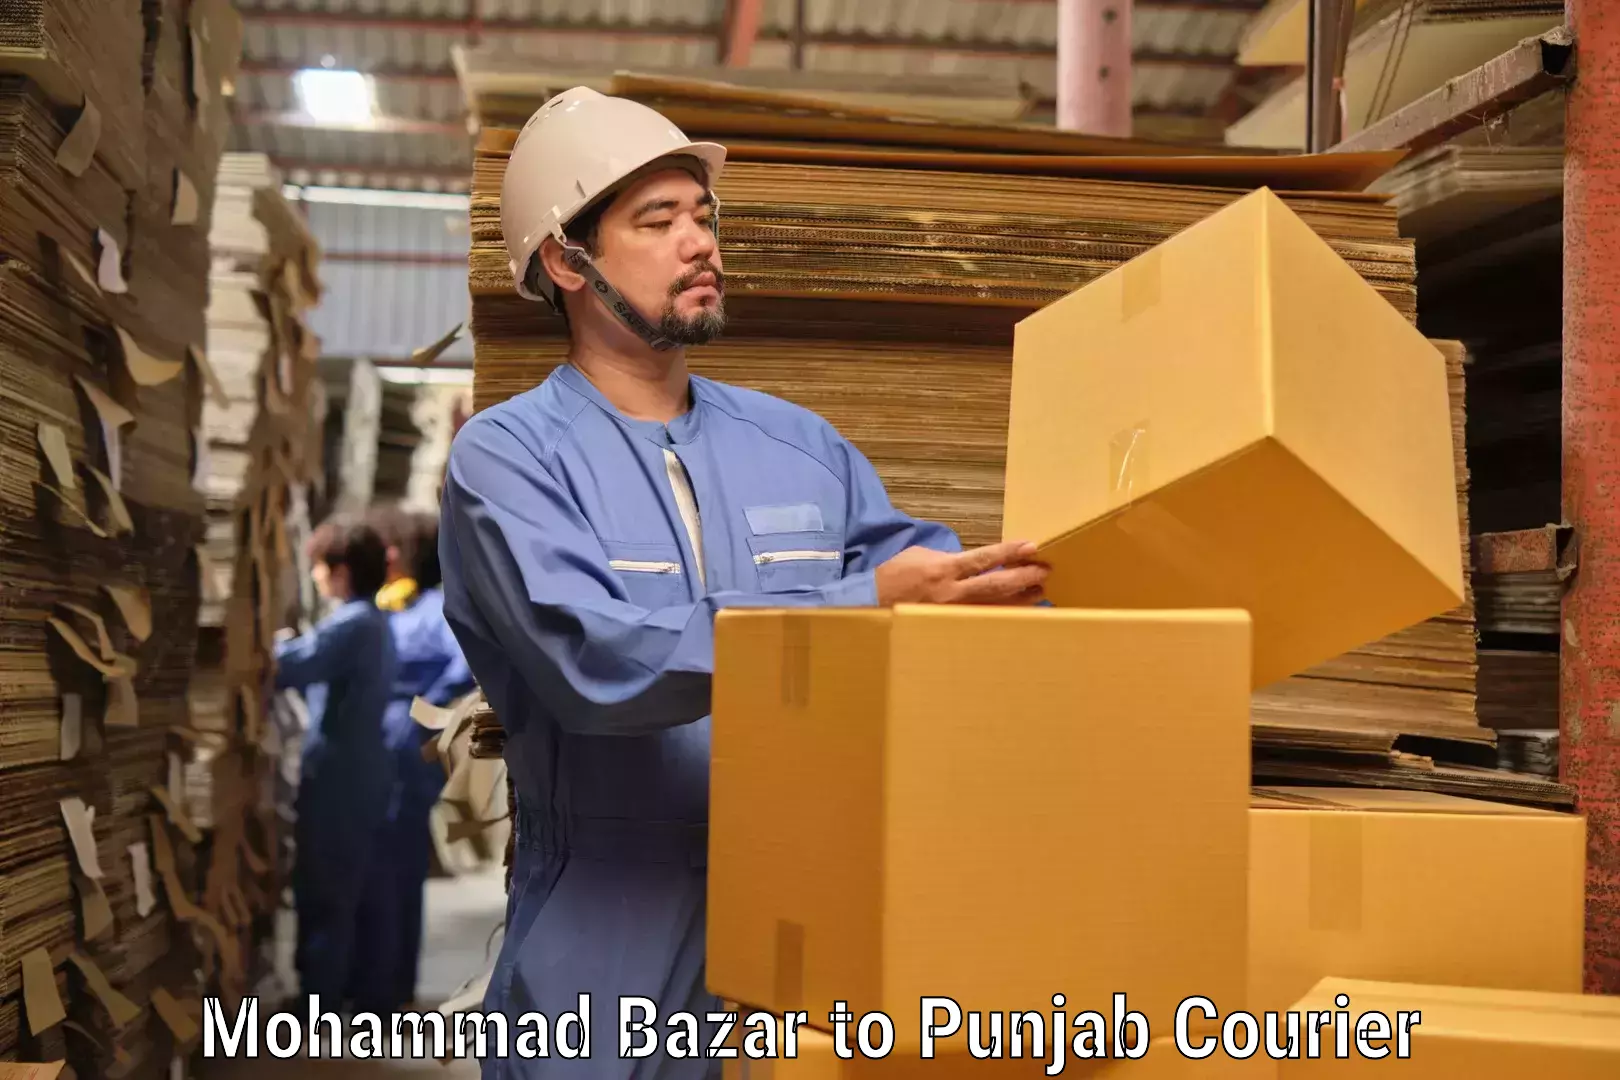 Seamless shipping experience Mohammad Bazar to Punjab